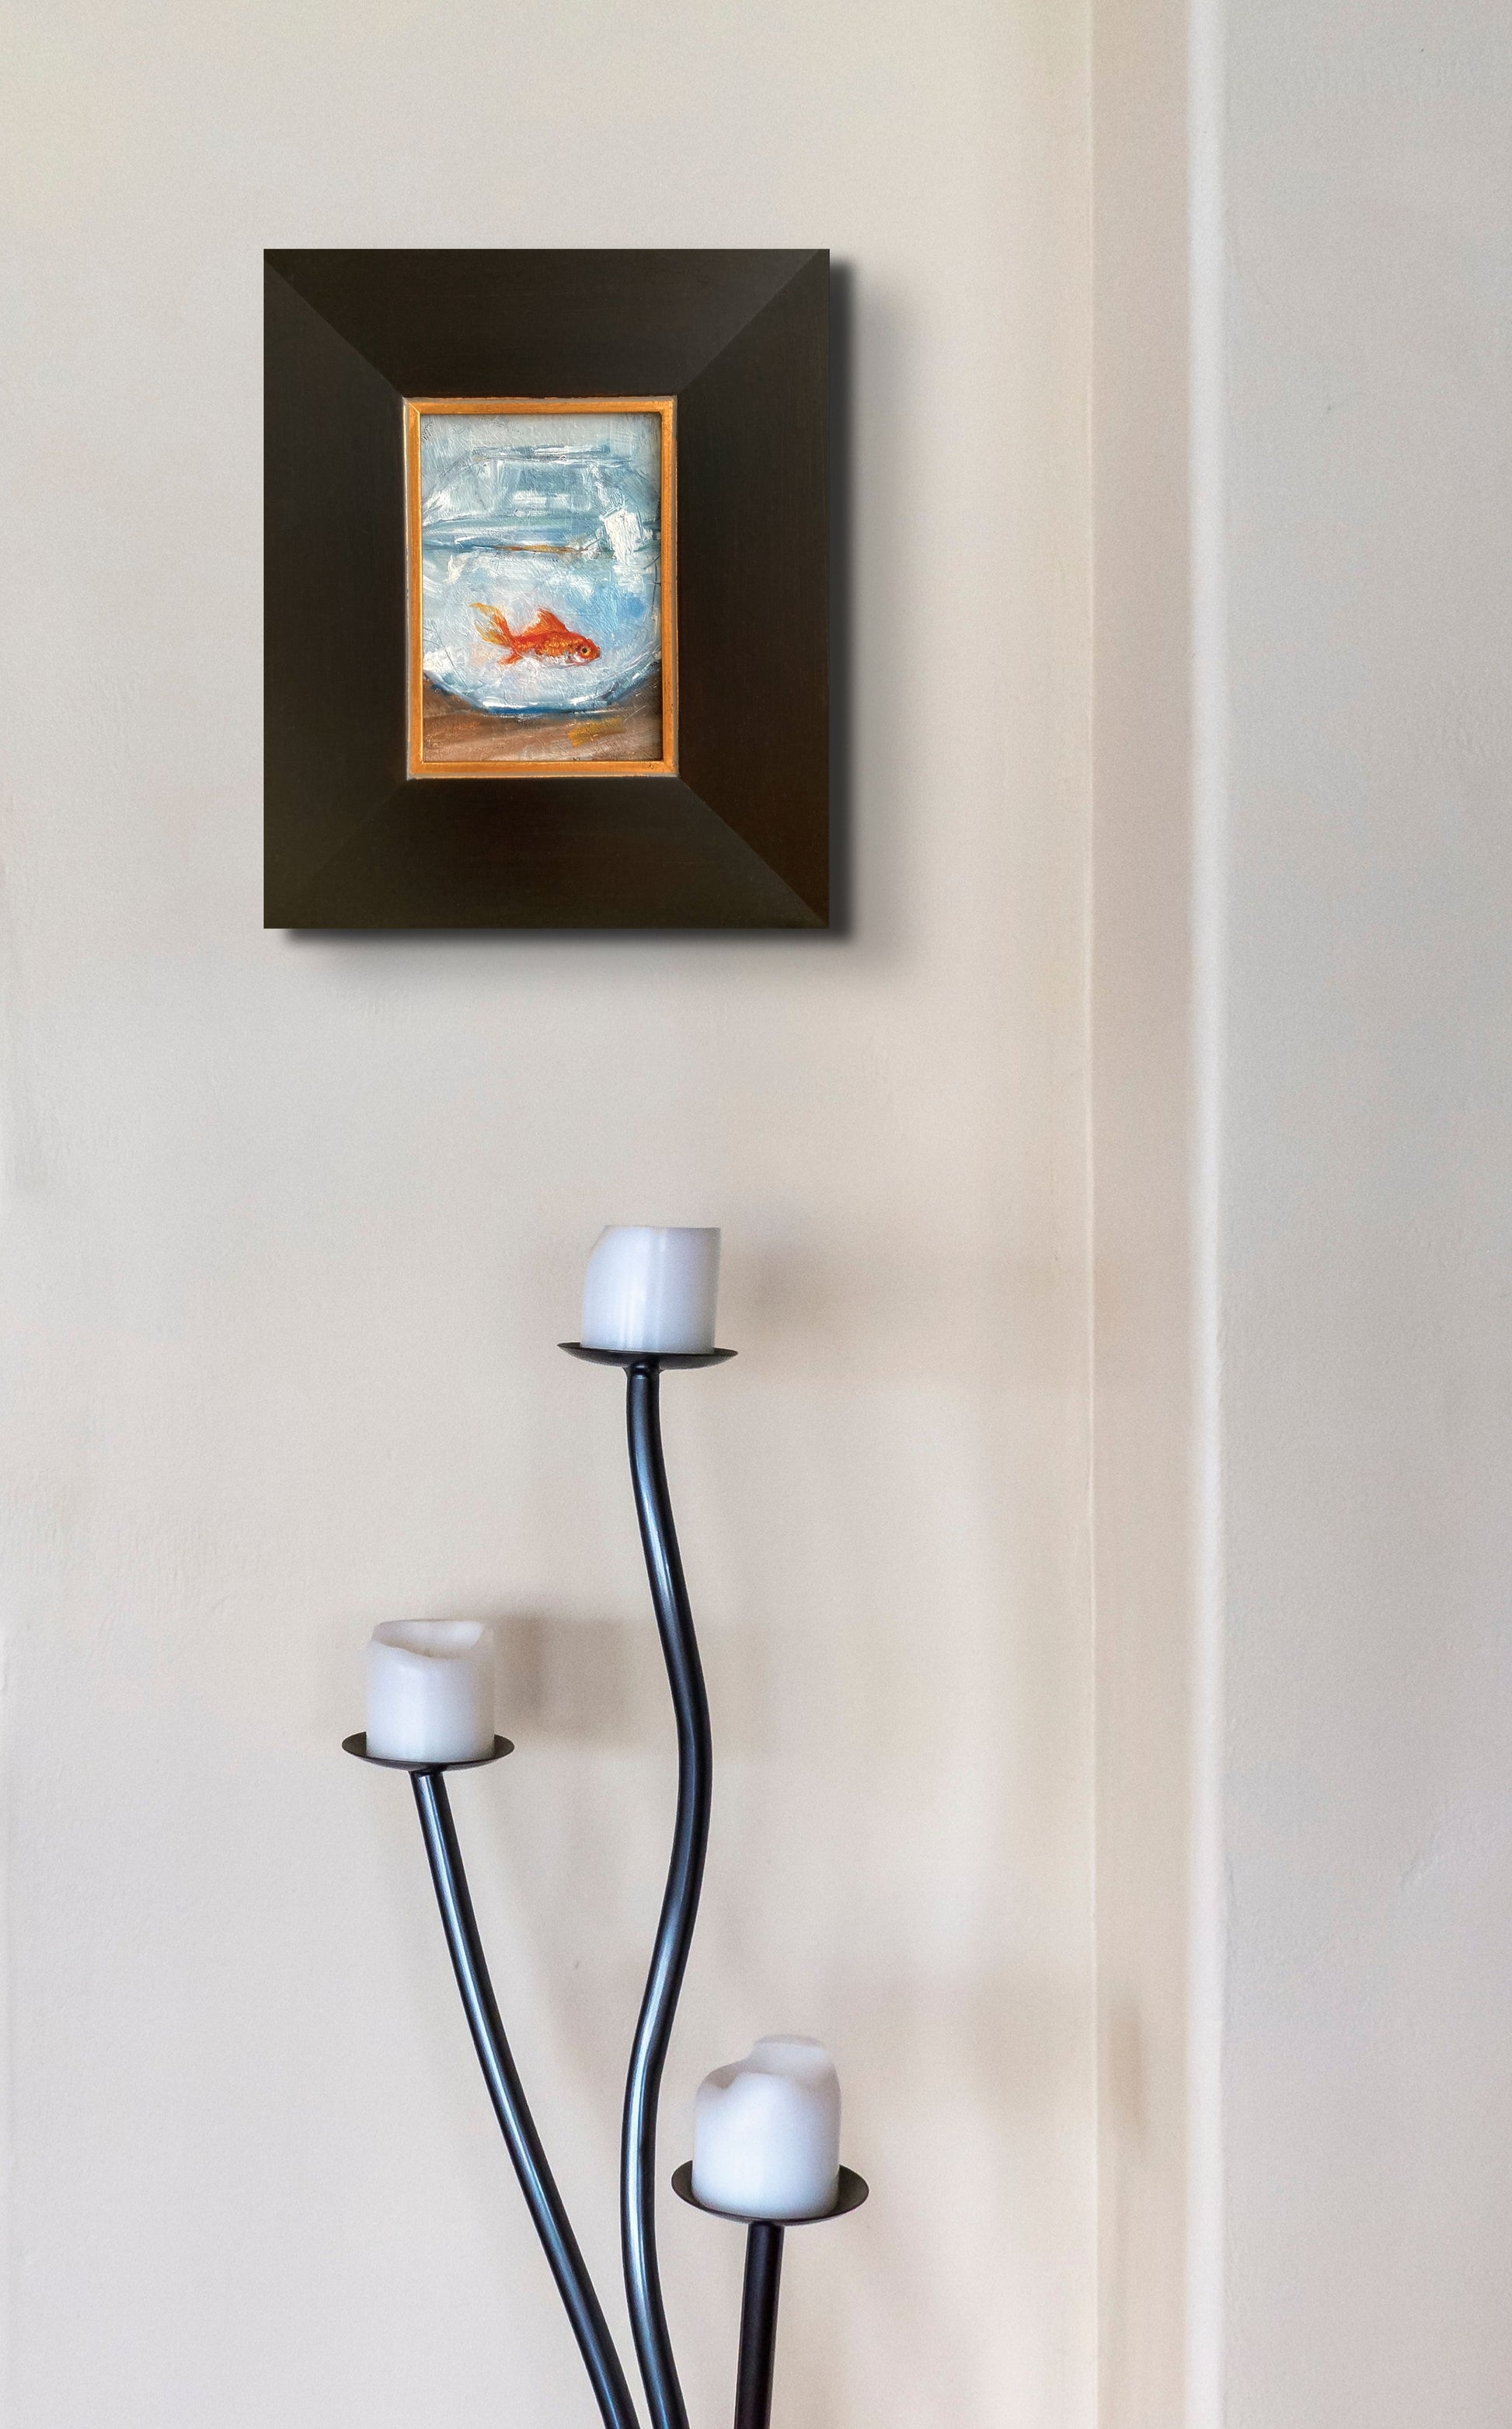 In situ photo of framed goldfish painting on wall with candlestick